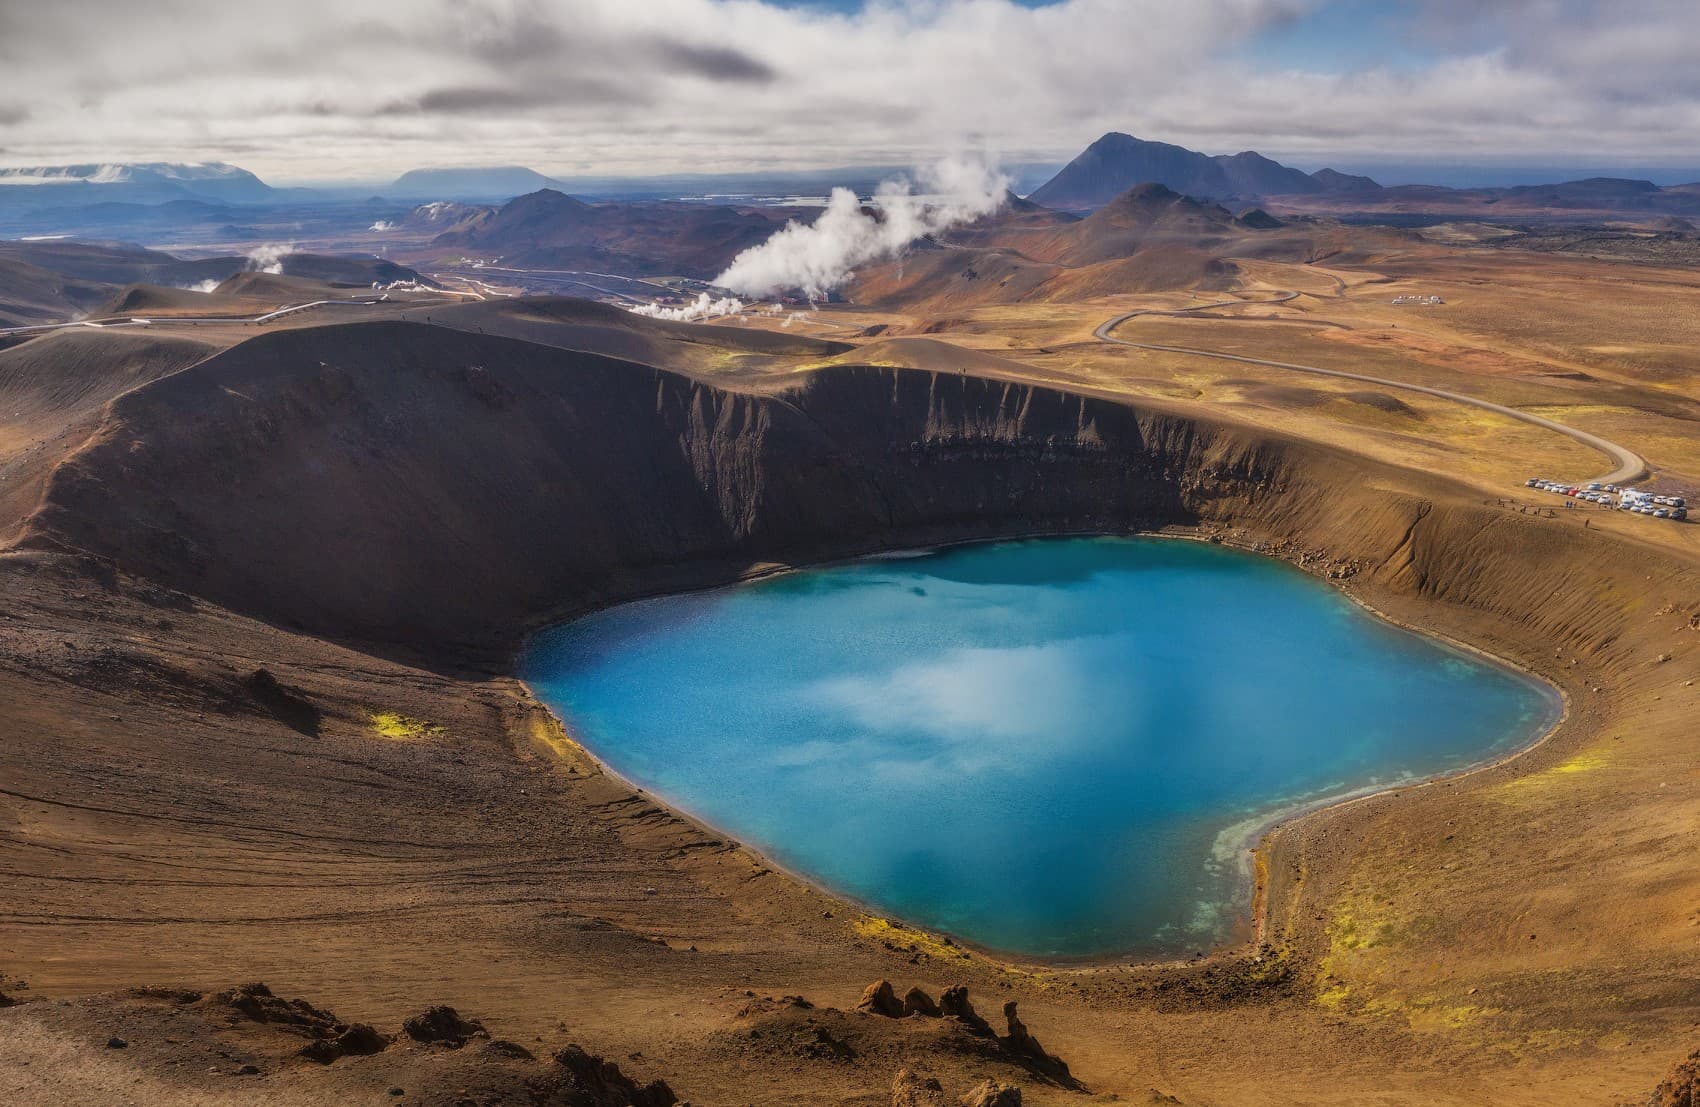 16 Intriguing Facts About Lake Myvatn - Facts.net